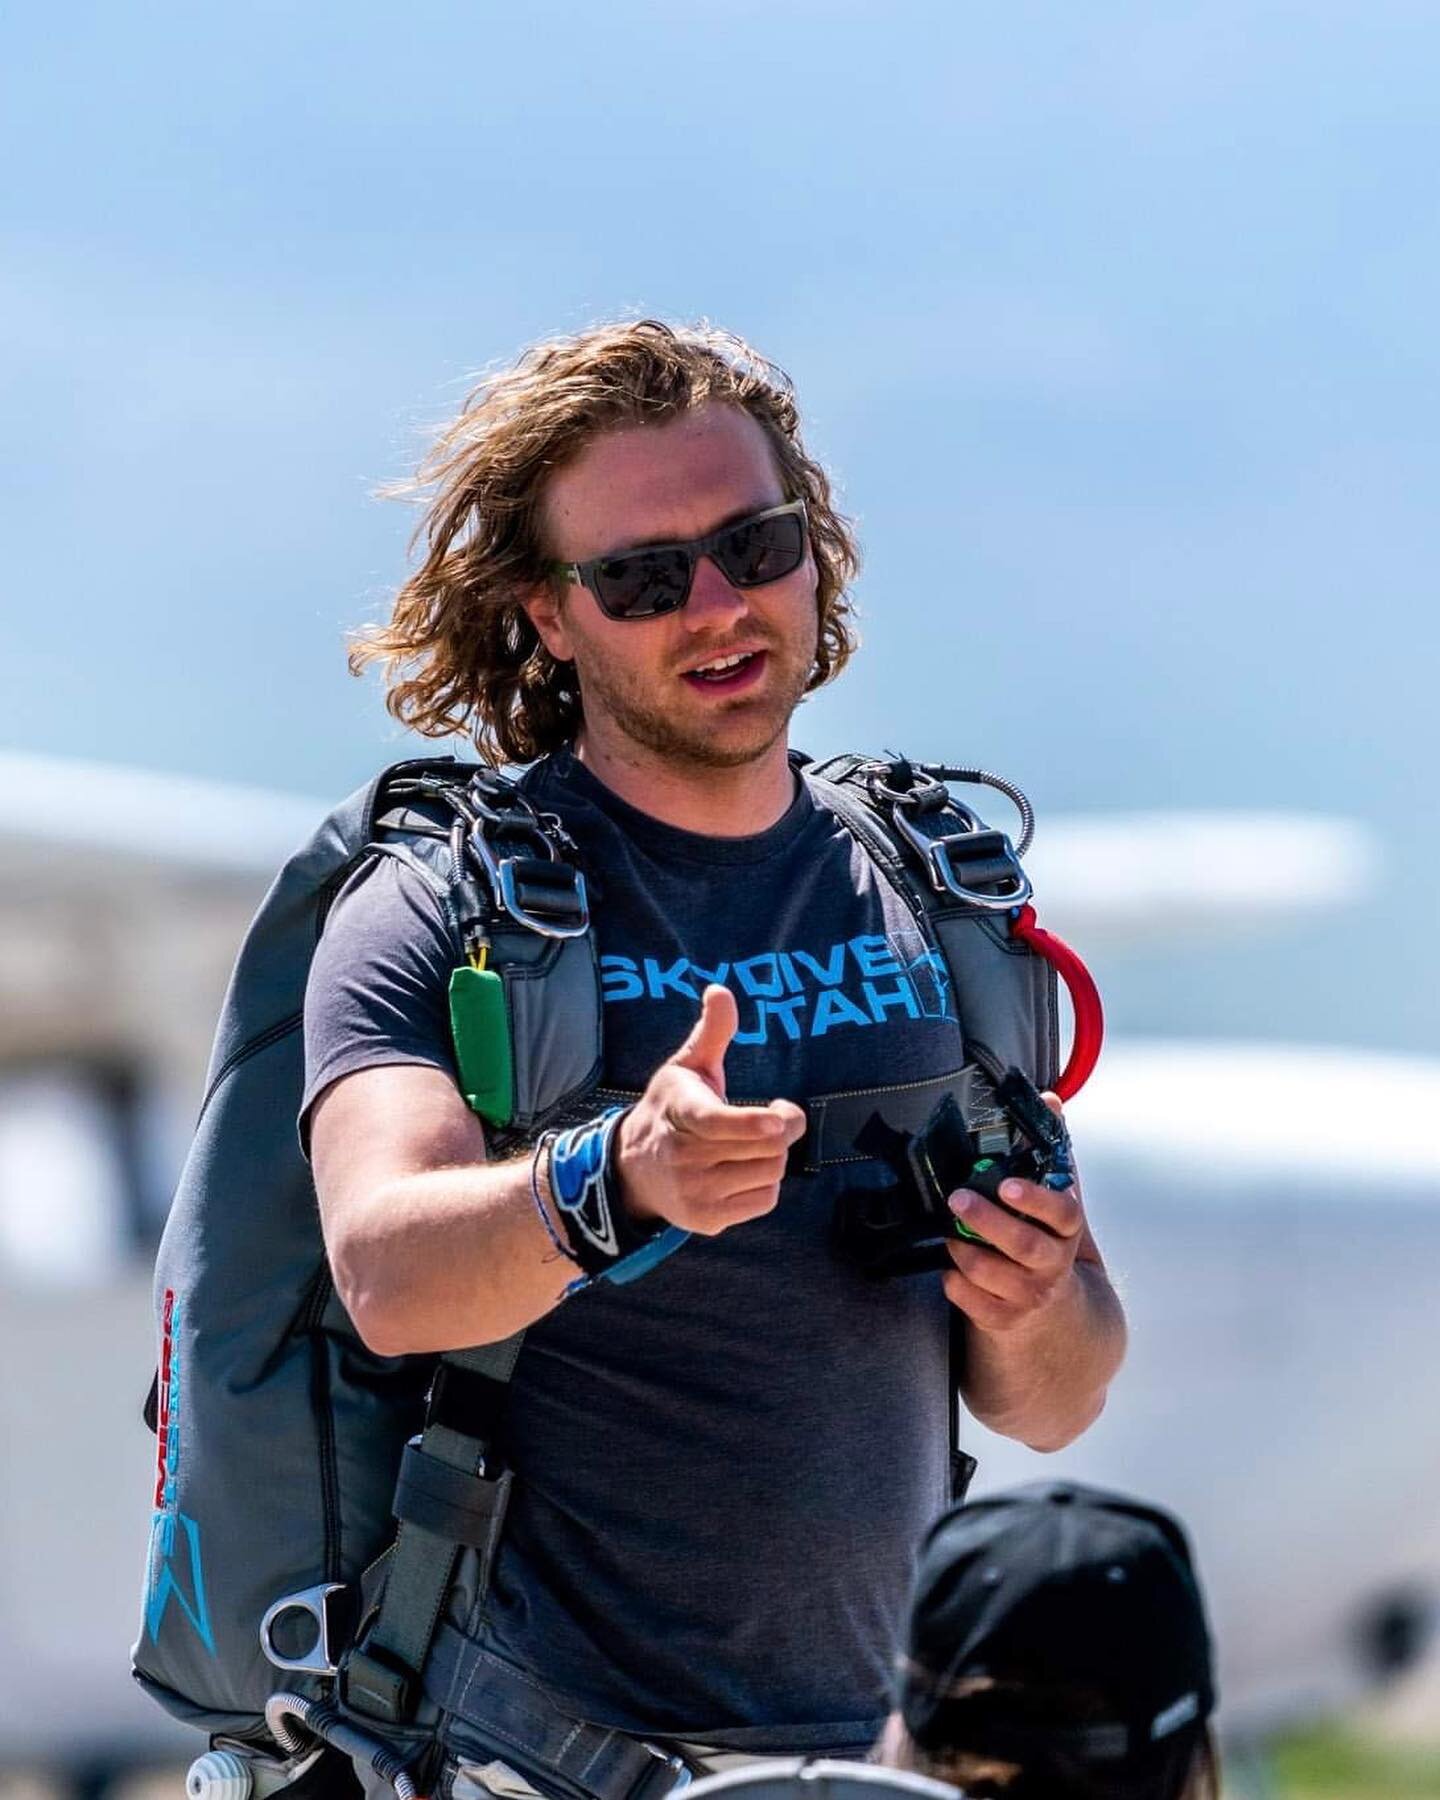 Staff highlight! This is Mitch, the jump staff manager at Skydive Utah 🤘 

Mitch started skydiving in 2013 at Skydive Wissota. He&rsquo;s been in the biz for 10 years and has around 4,500 skydives! Mitch started working here in 2019 and is a tandem 